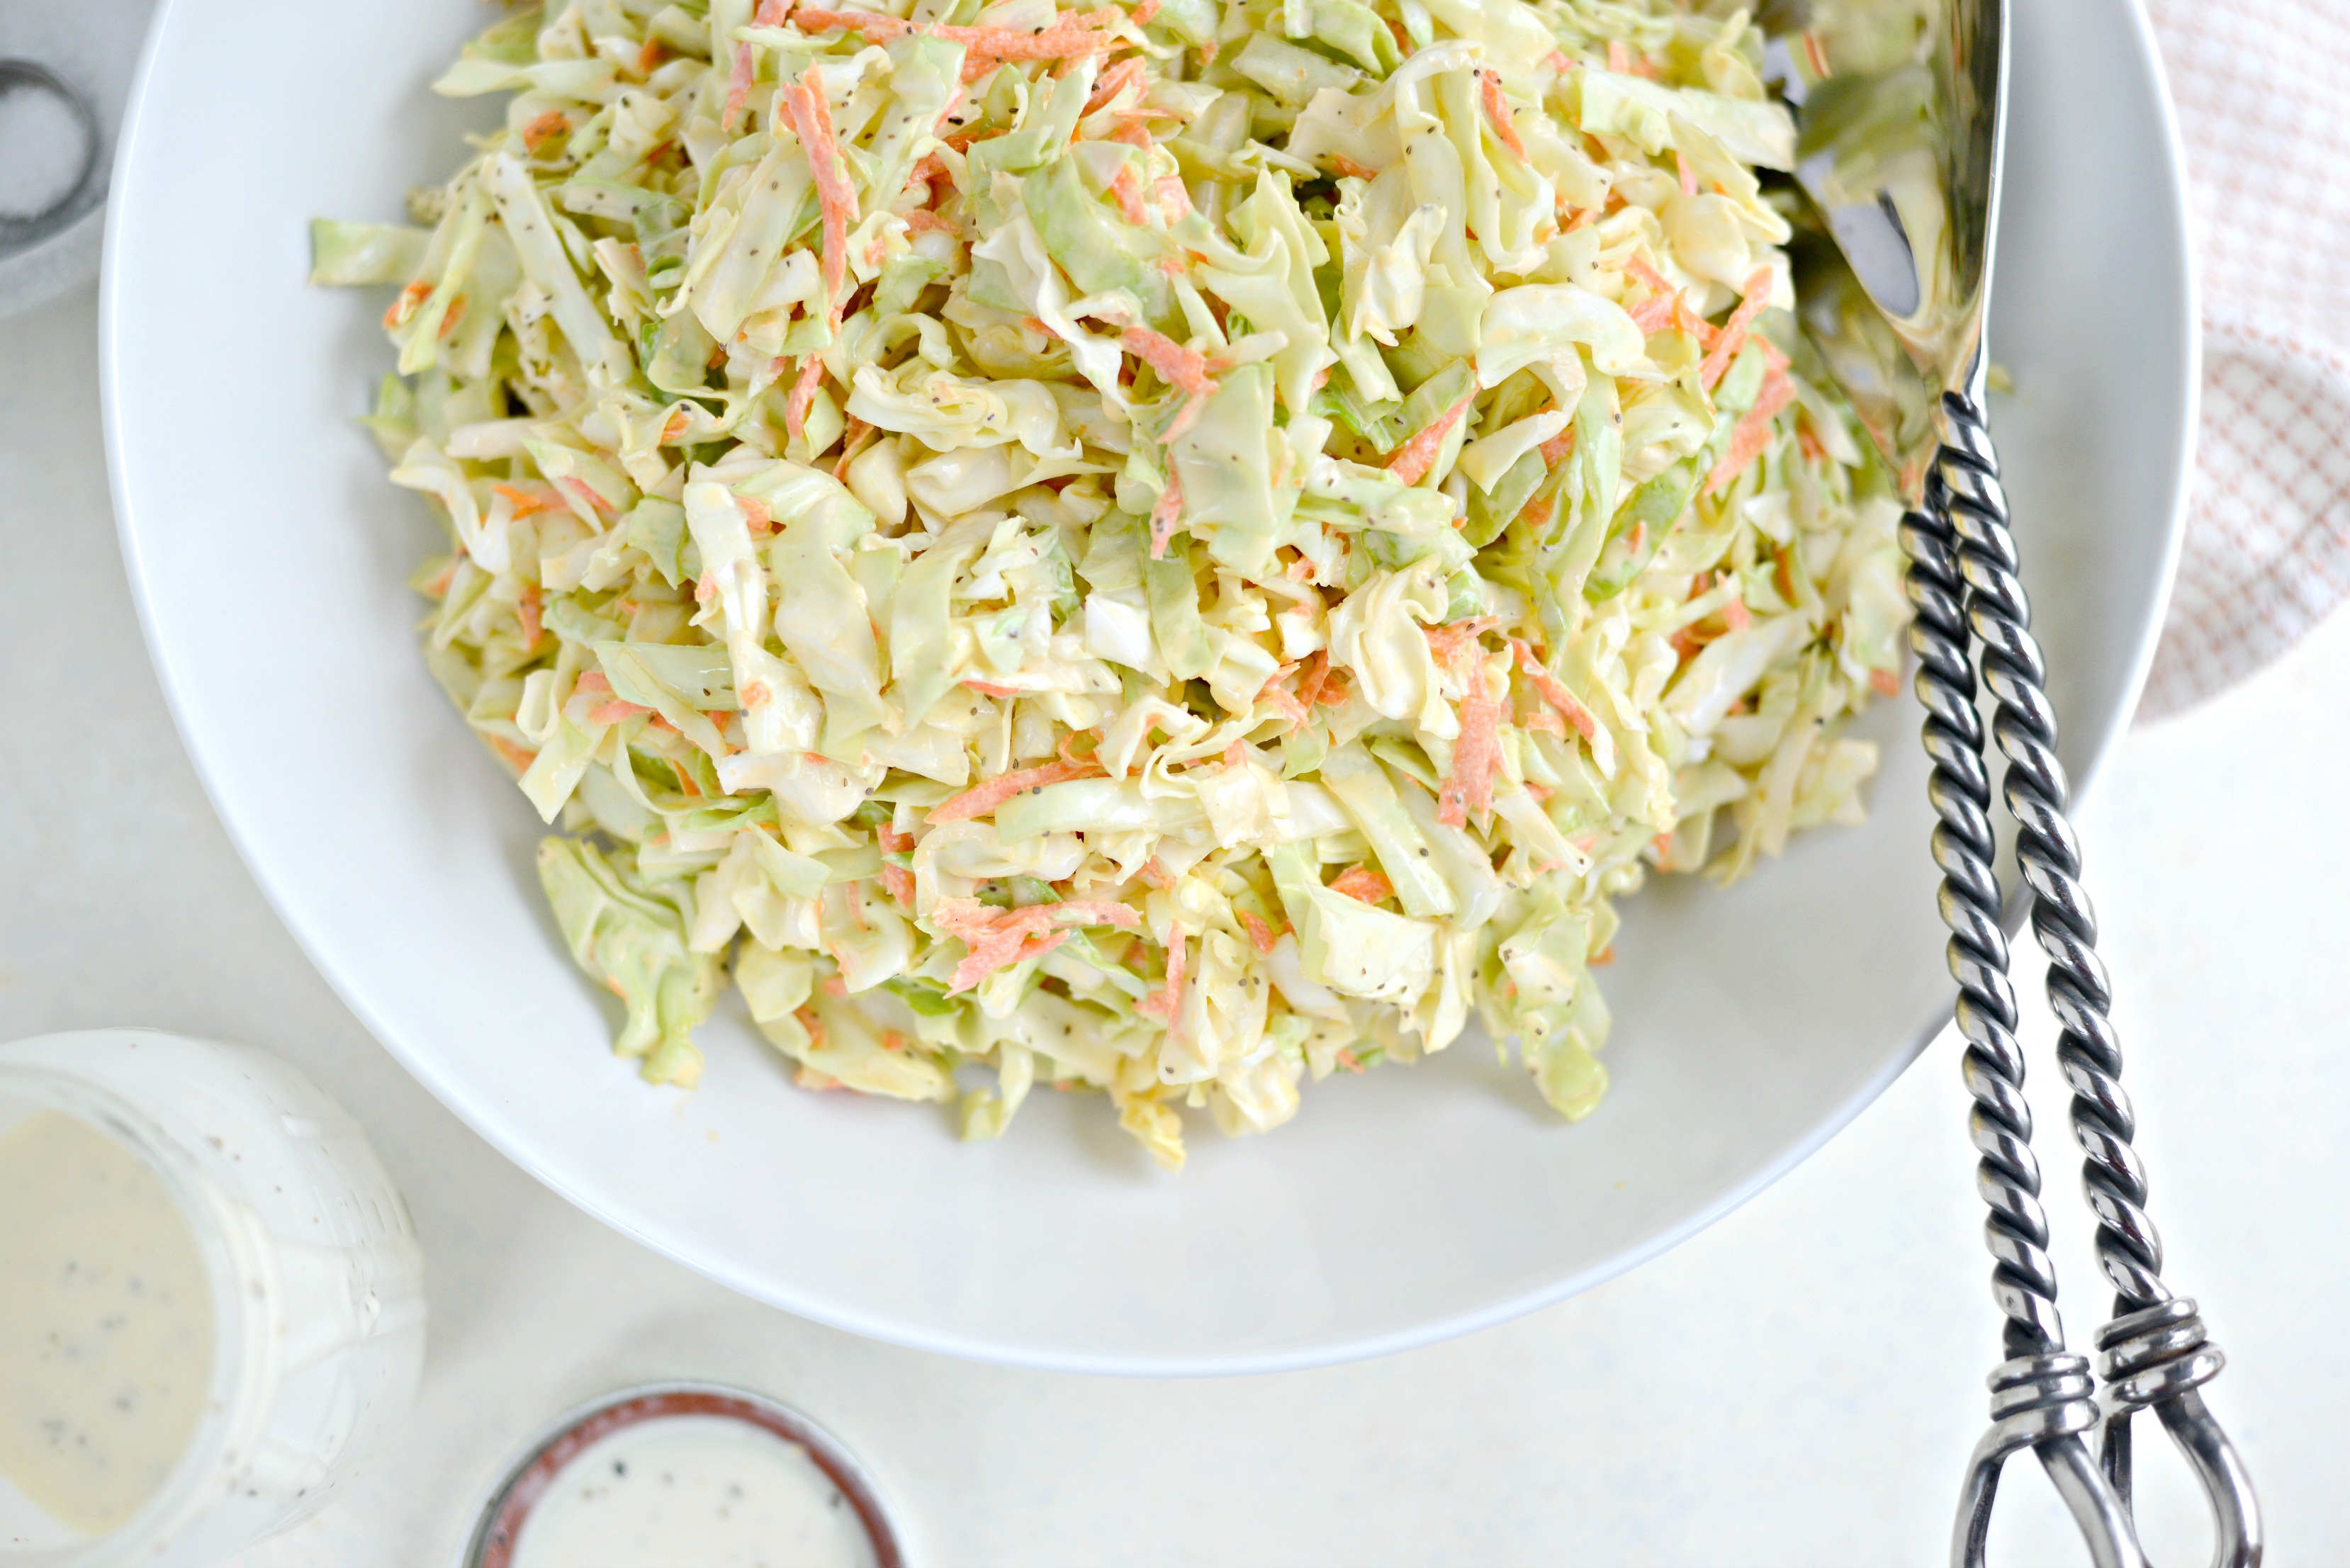 Classic Coleslaw Recipe with Homemade Dressing - Simply Scratch